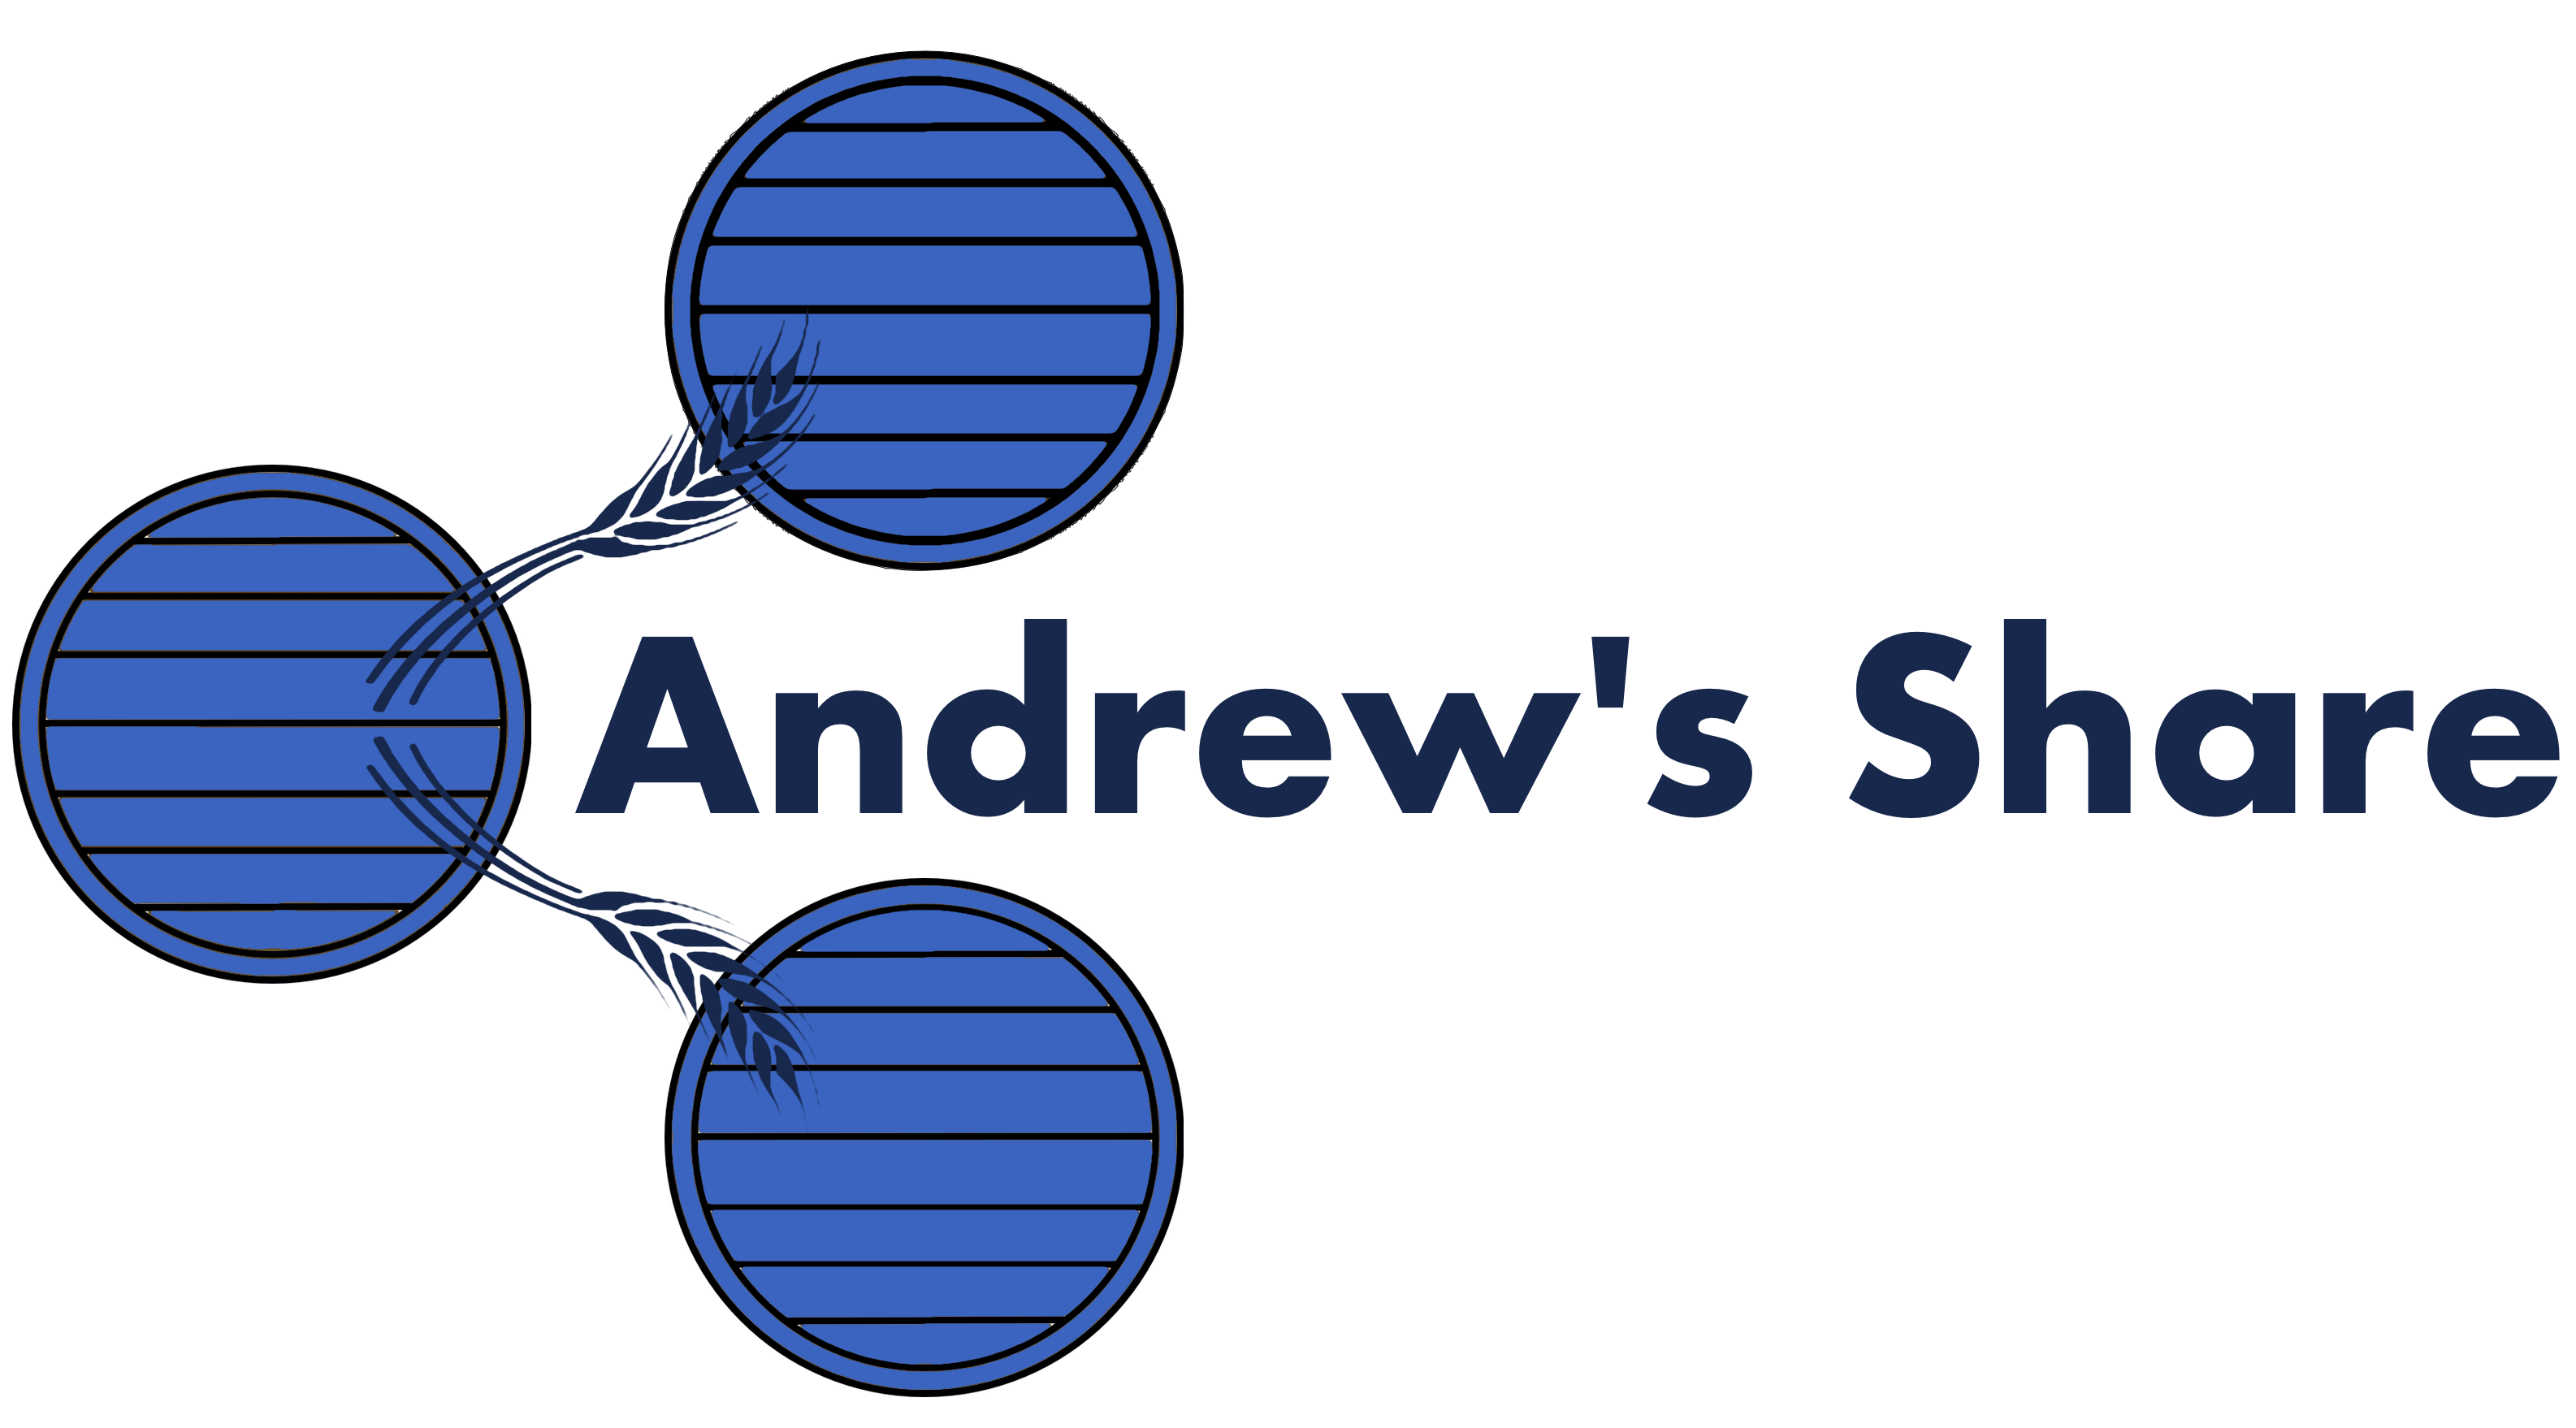 Andrew’s Share